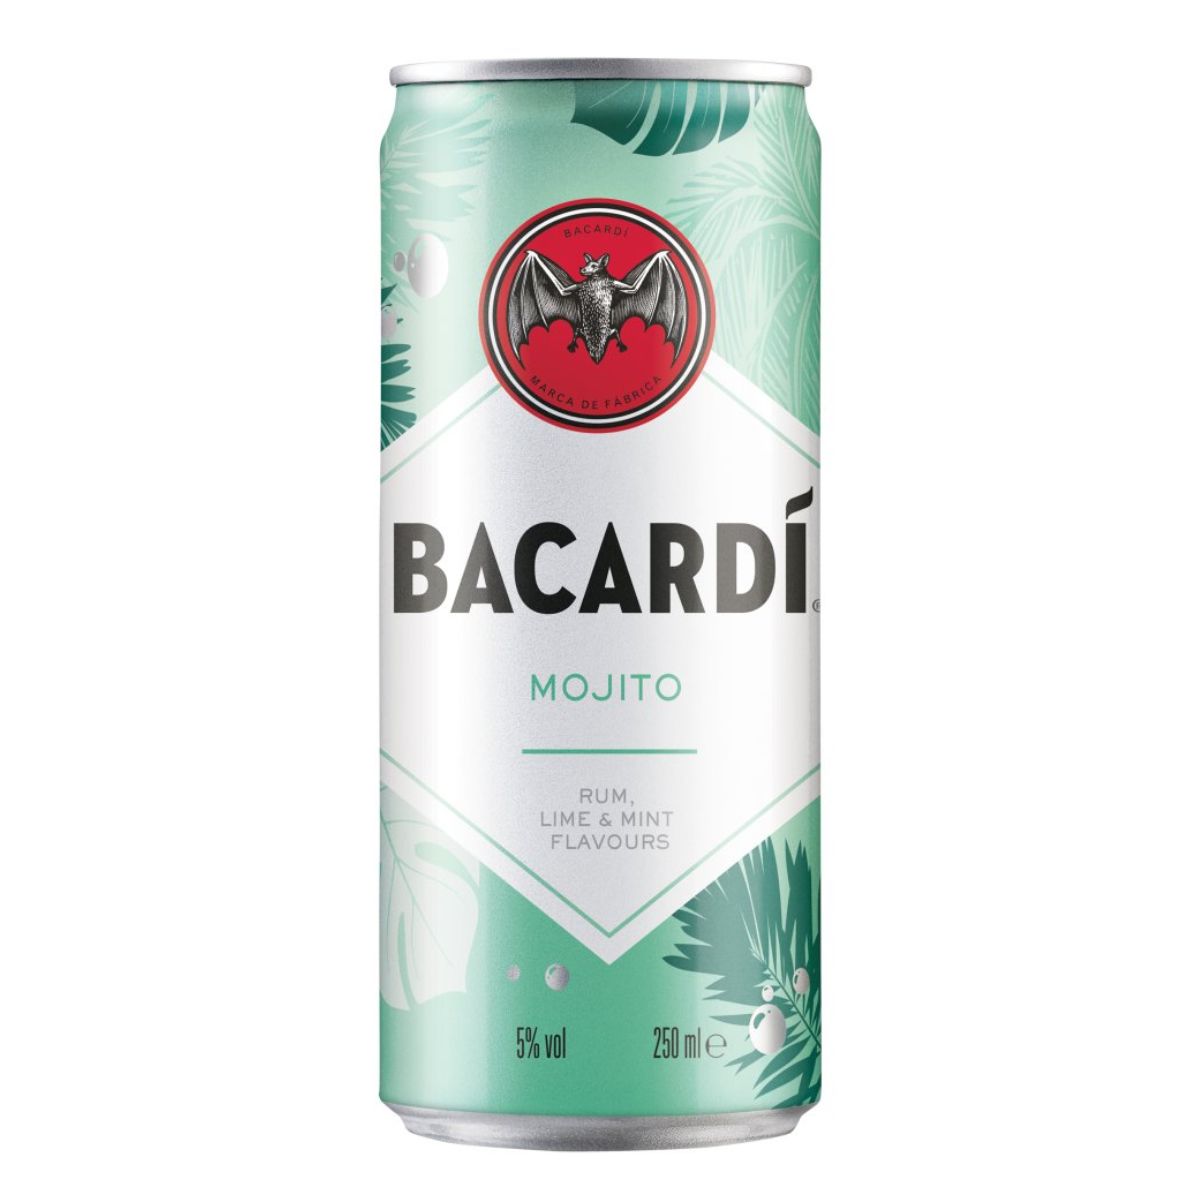 A can of Bacardi - Mojito (5% ABV) - 250ml on a white background.